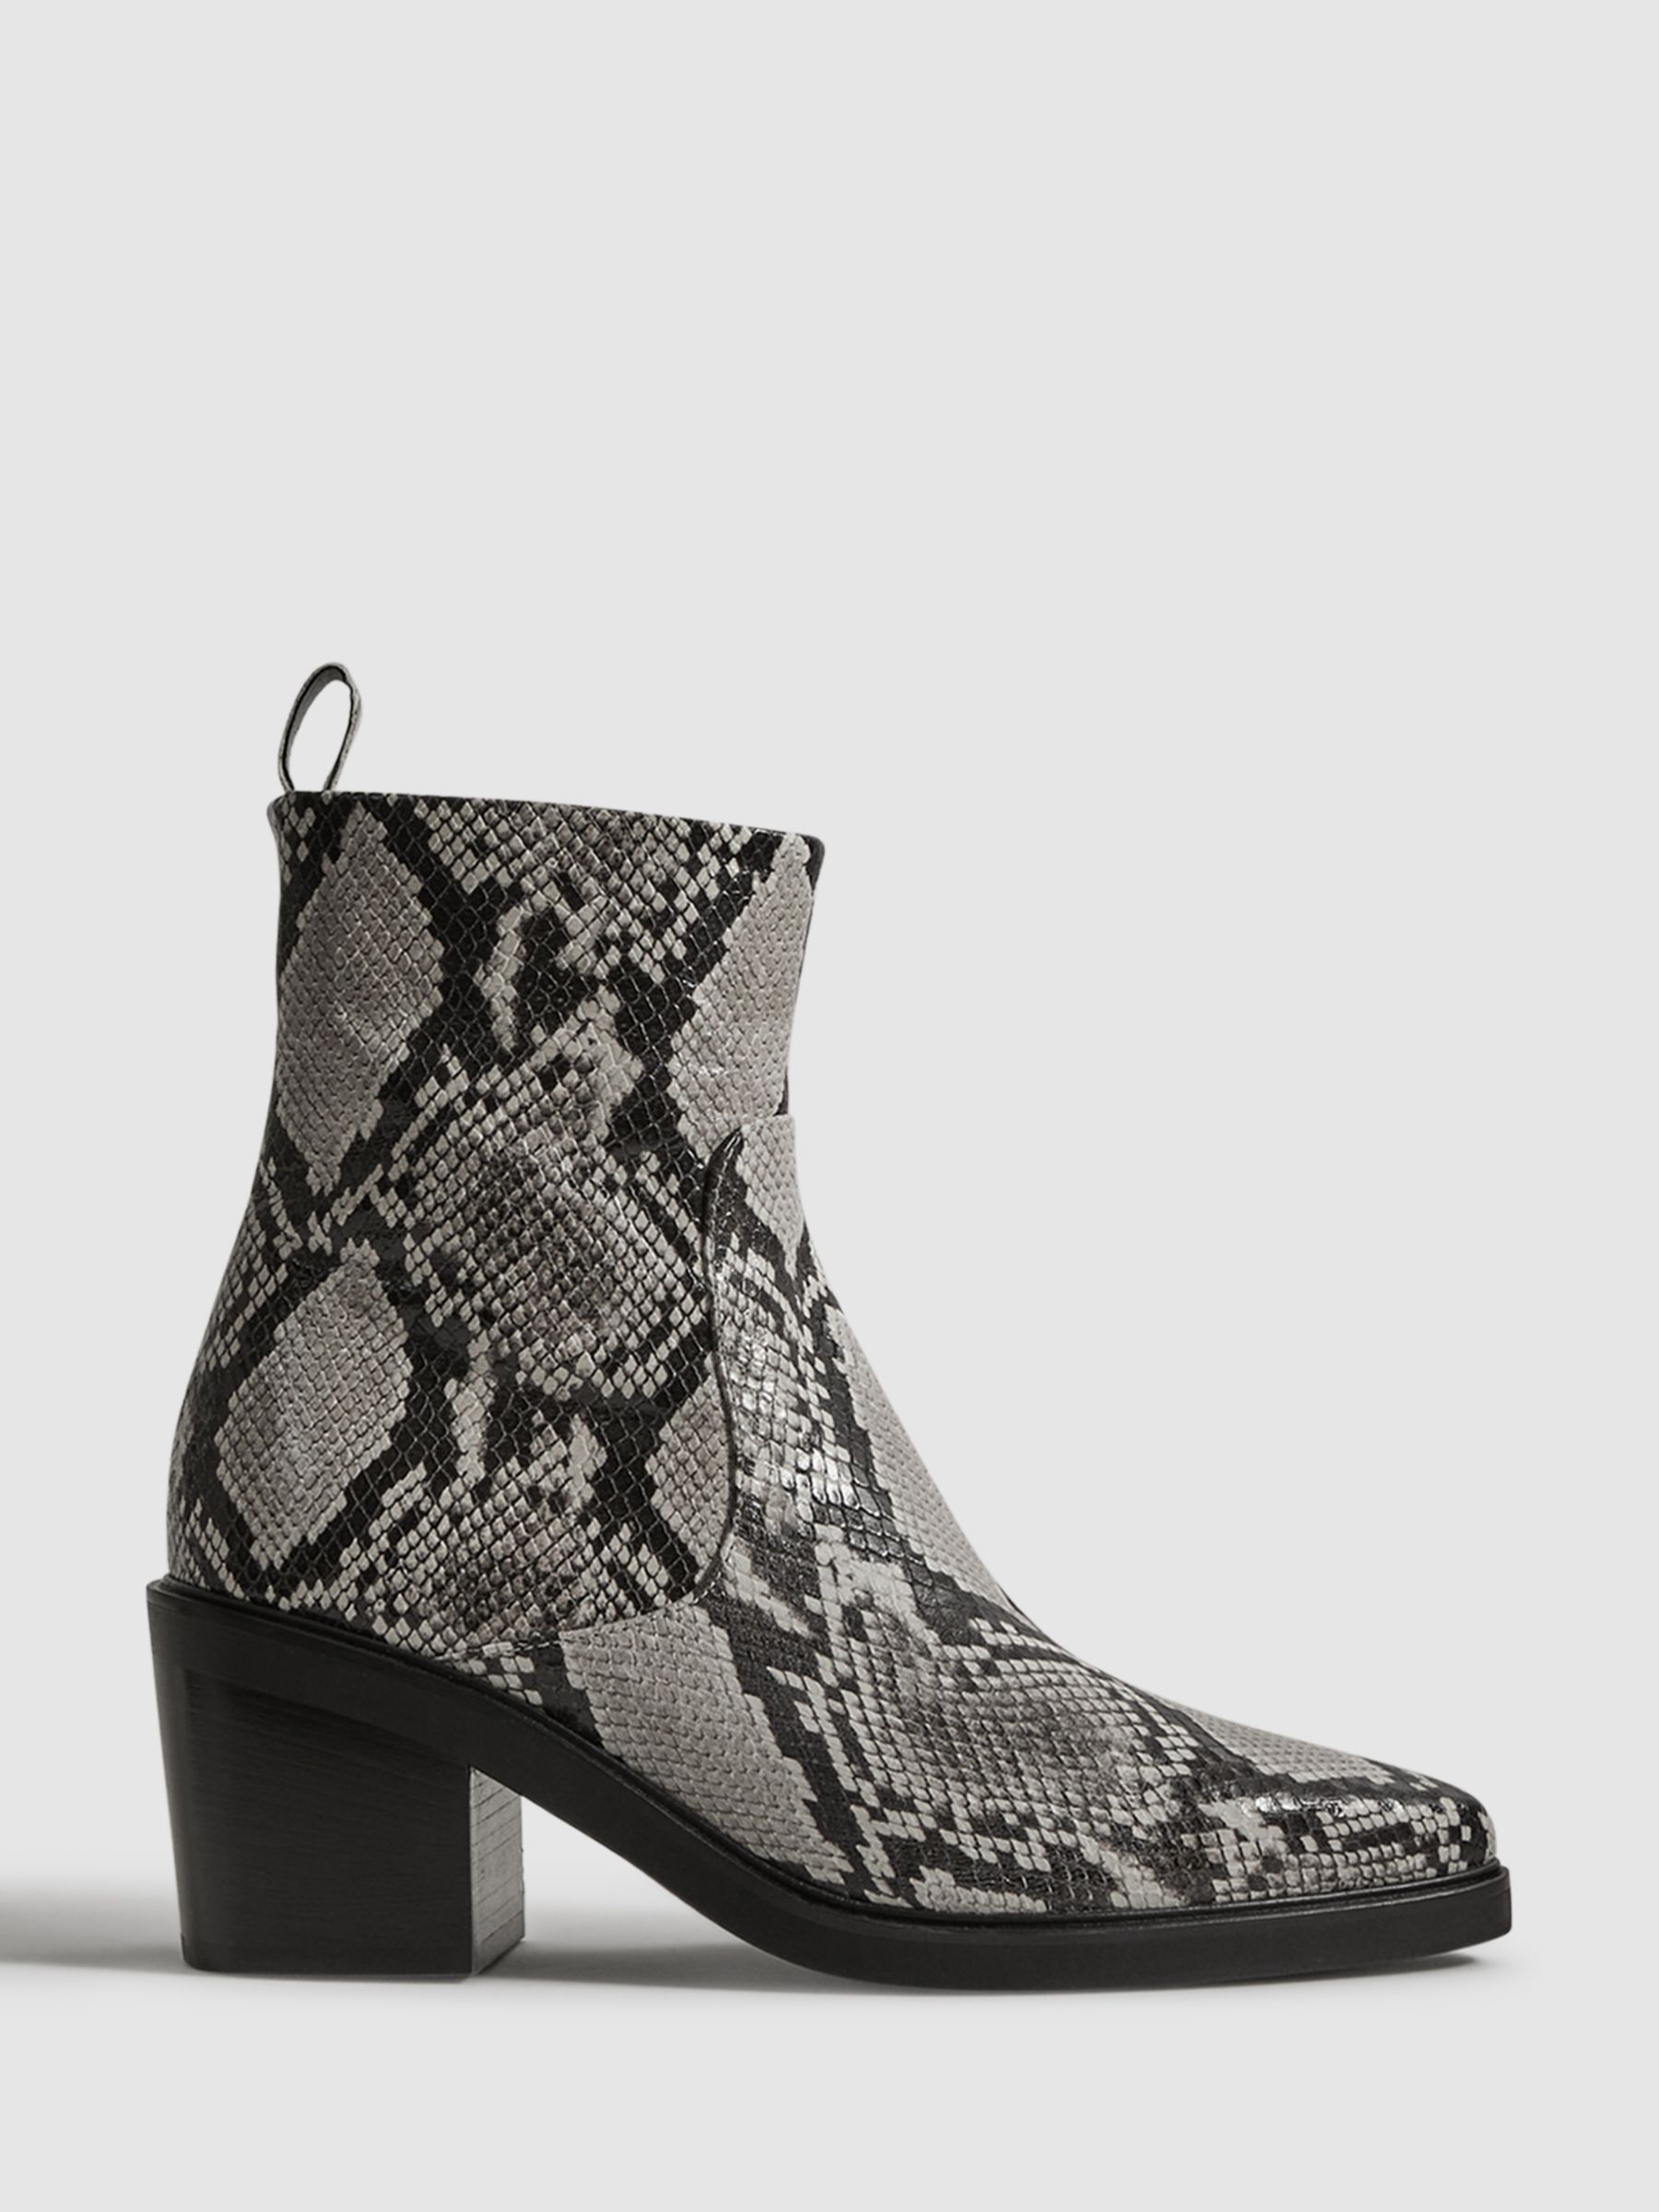 Reiss Sienna Snake Print Leather Ankle Boots, Multi, 3